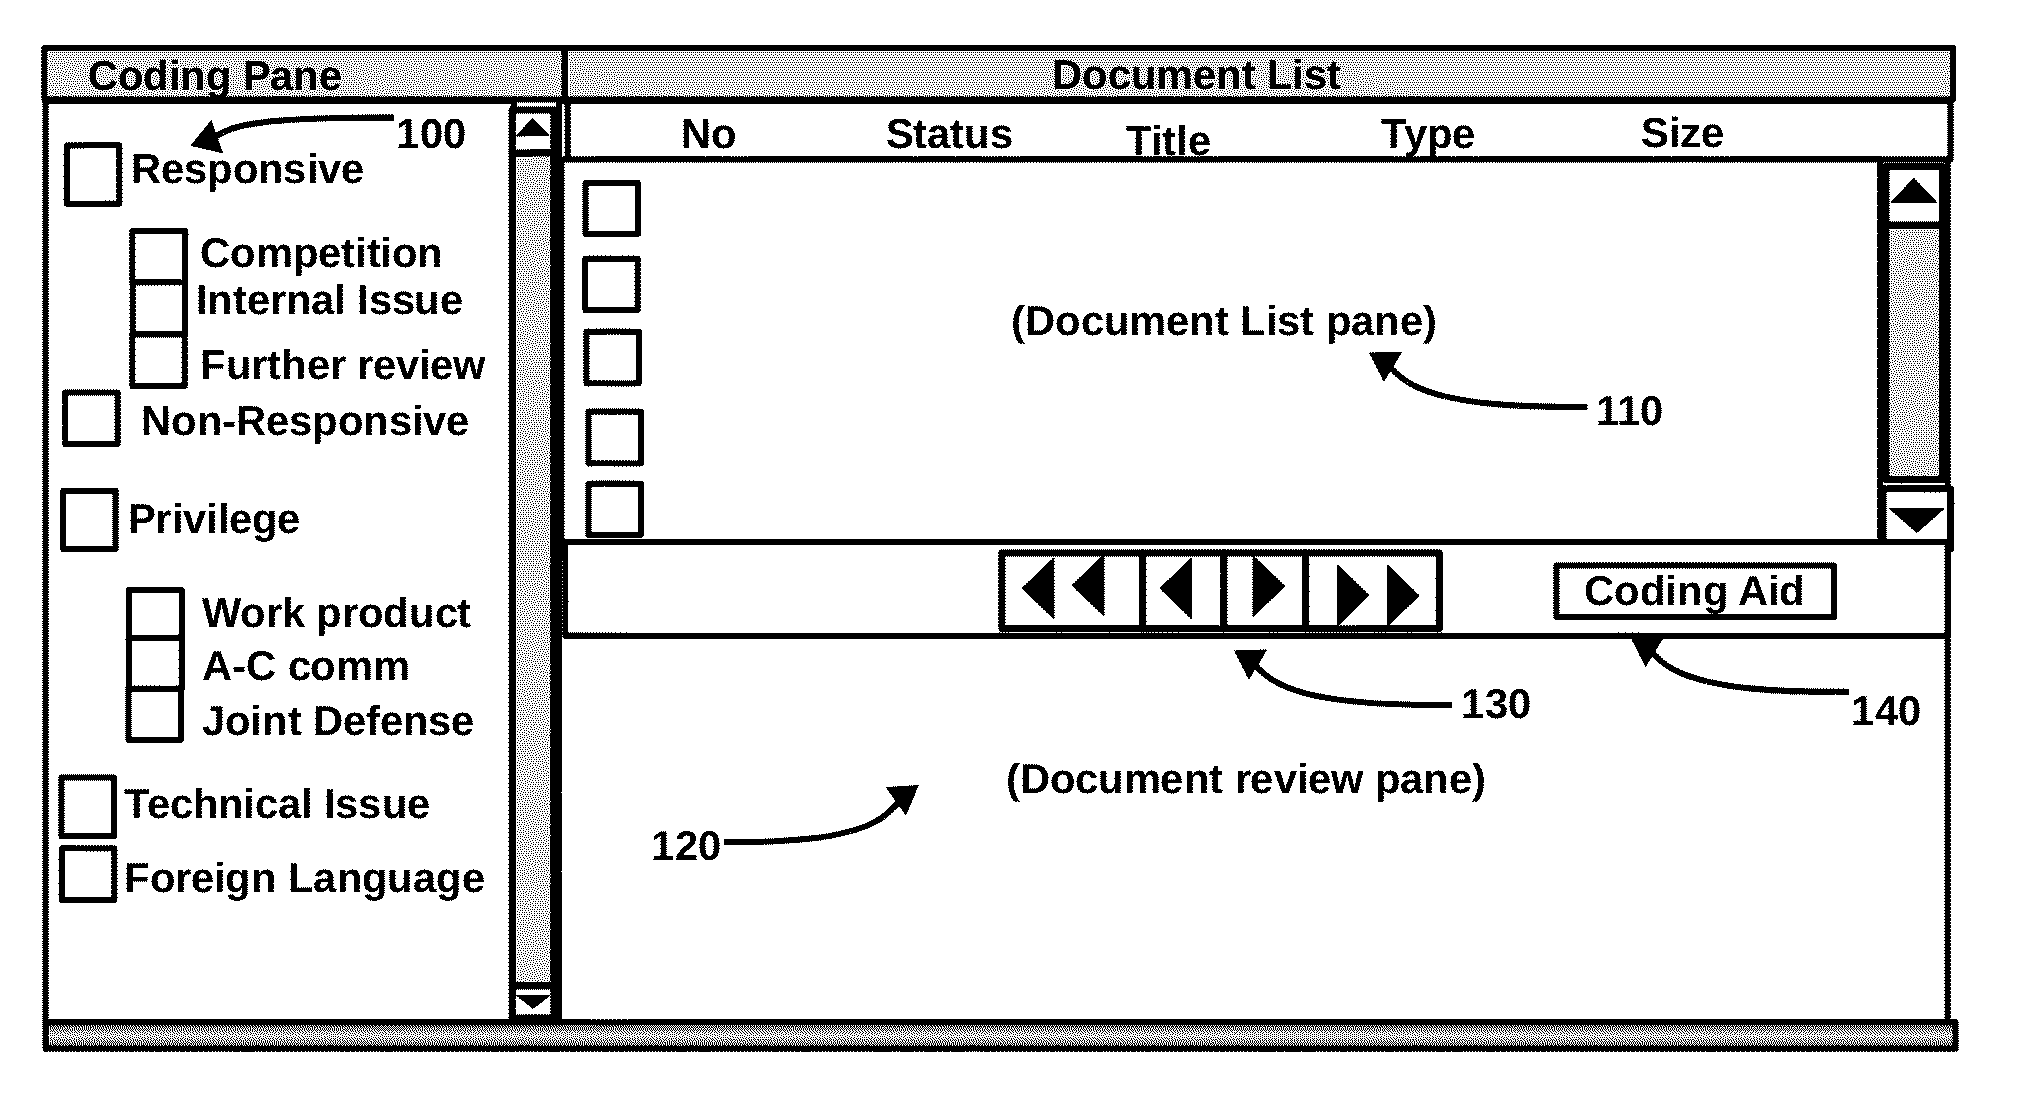 Method for Improving Document Review Performance